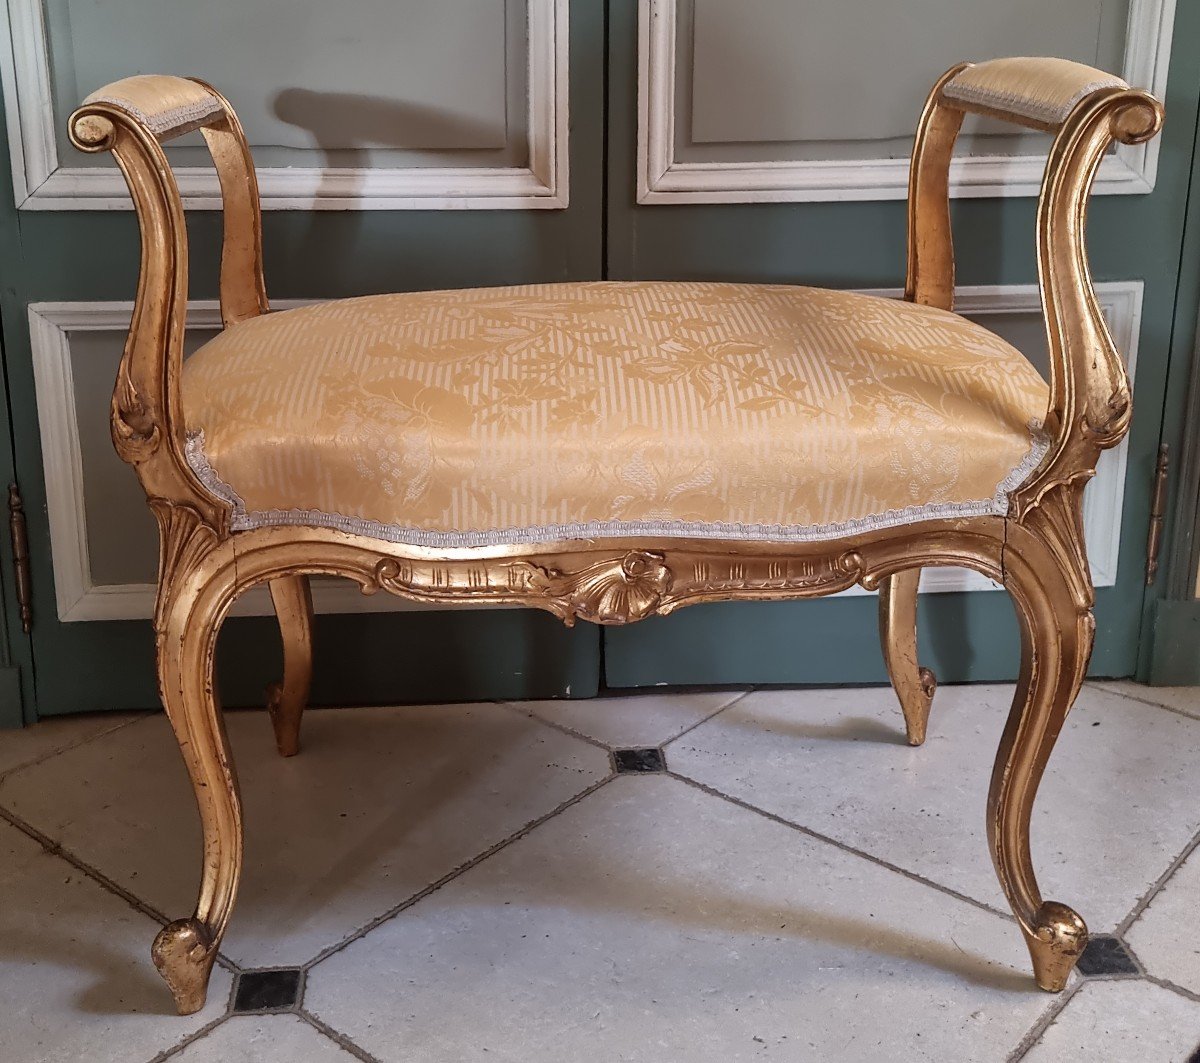 Small Bench In Golden Wood Late 19th Century Louis XV Style